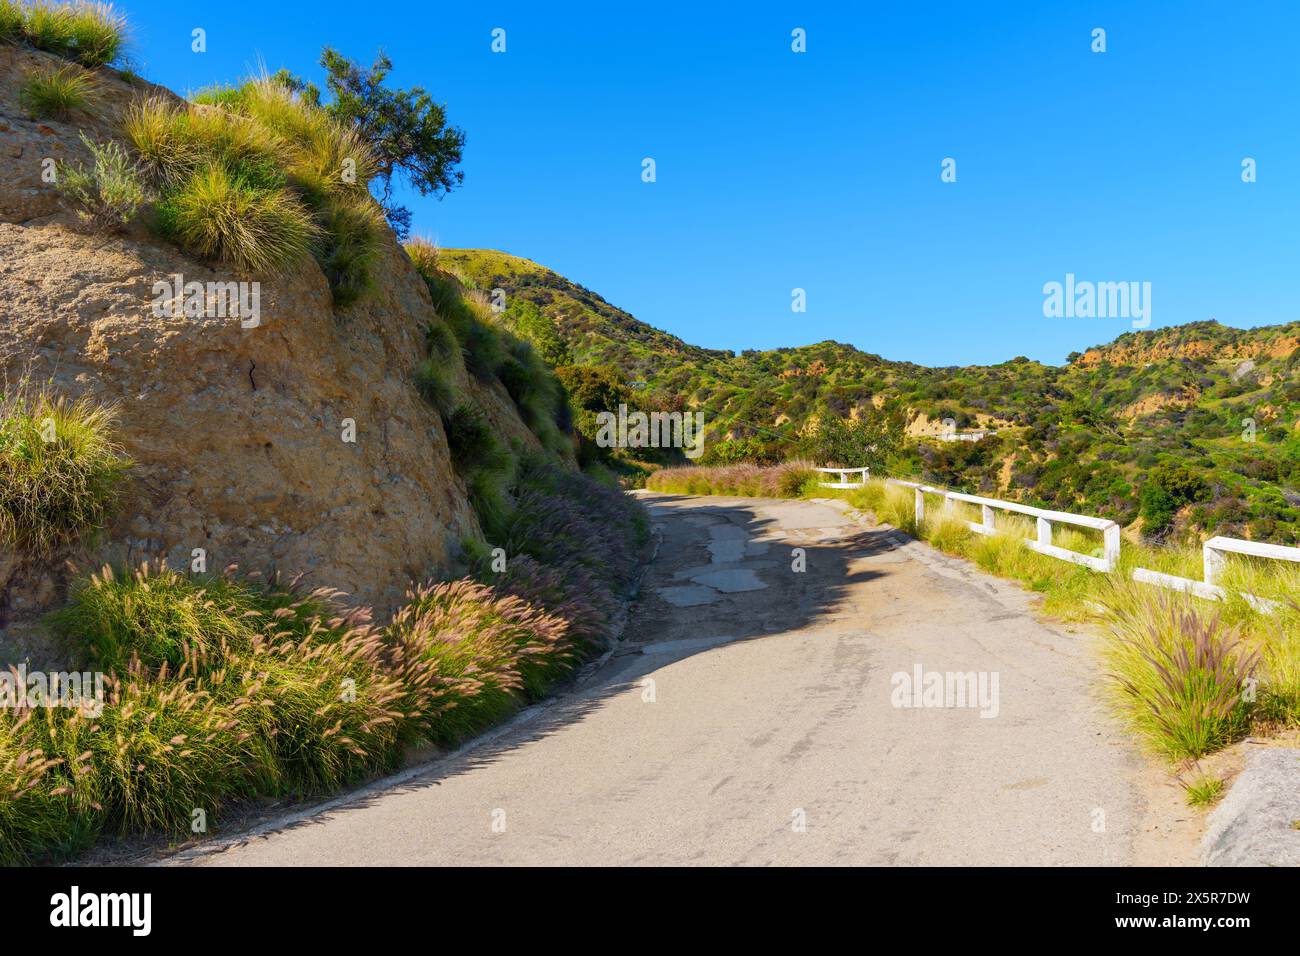 Section of the iconic hiking trail in the Hollywood Hills - a portion of the winding path as it meanders through the picturesque landscape. Stock Photo